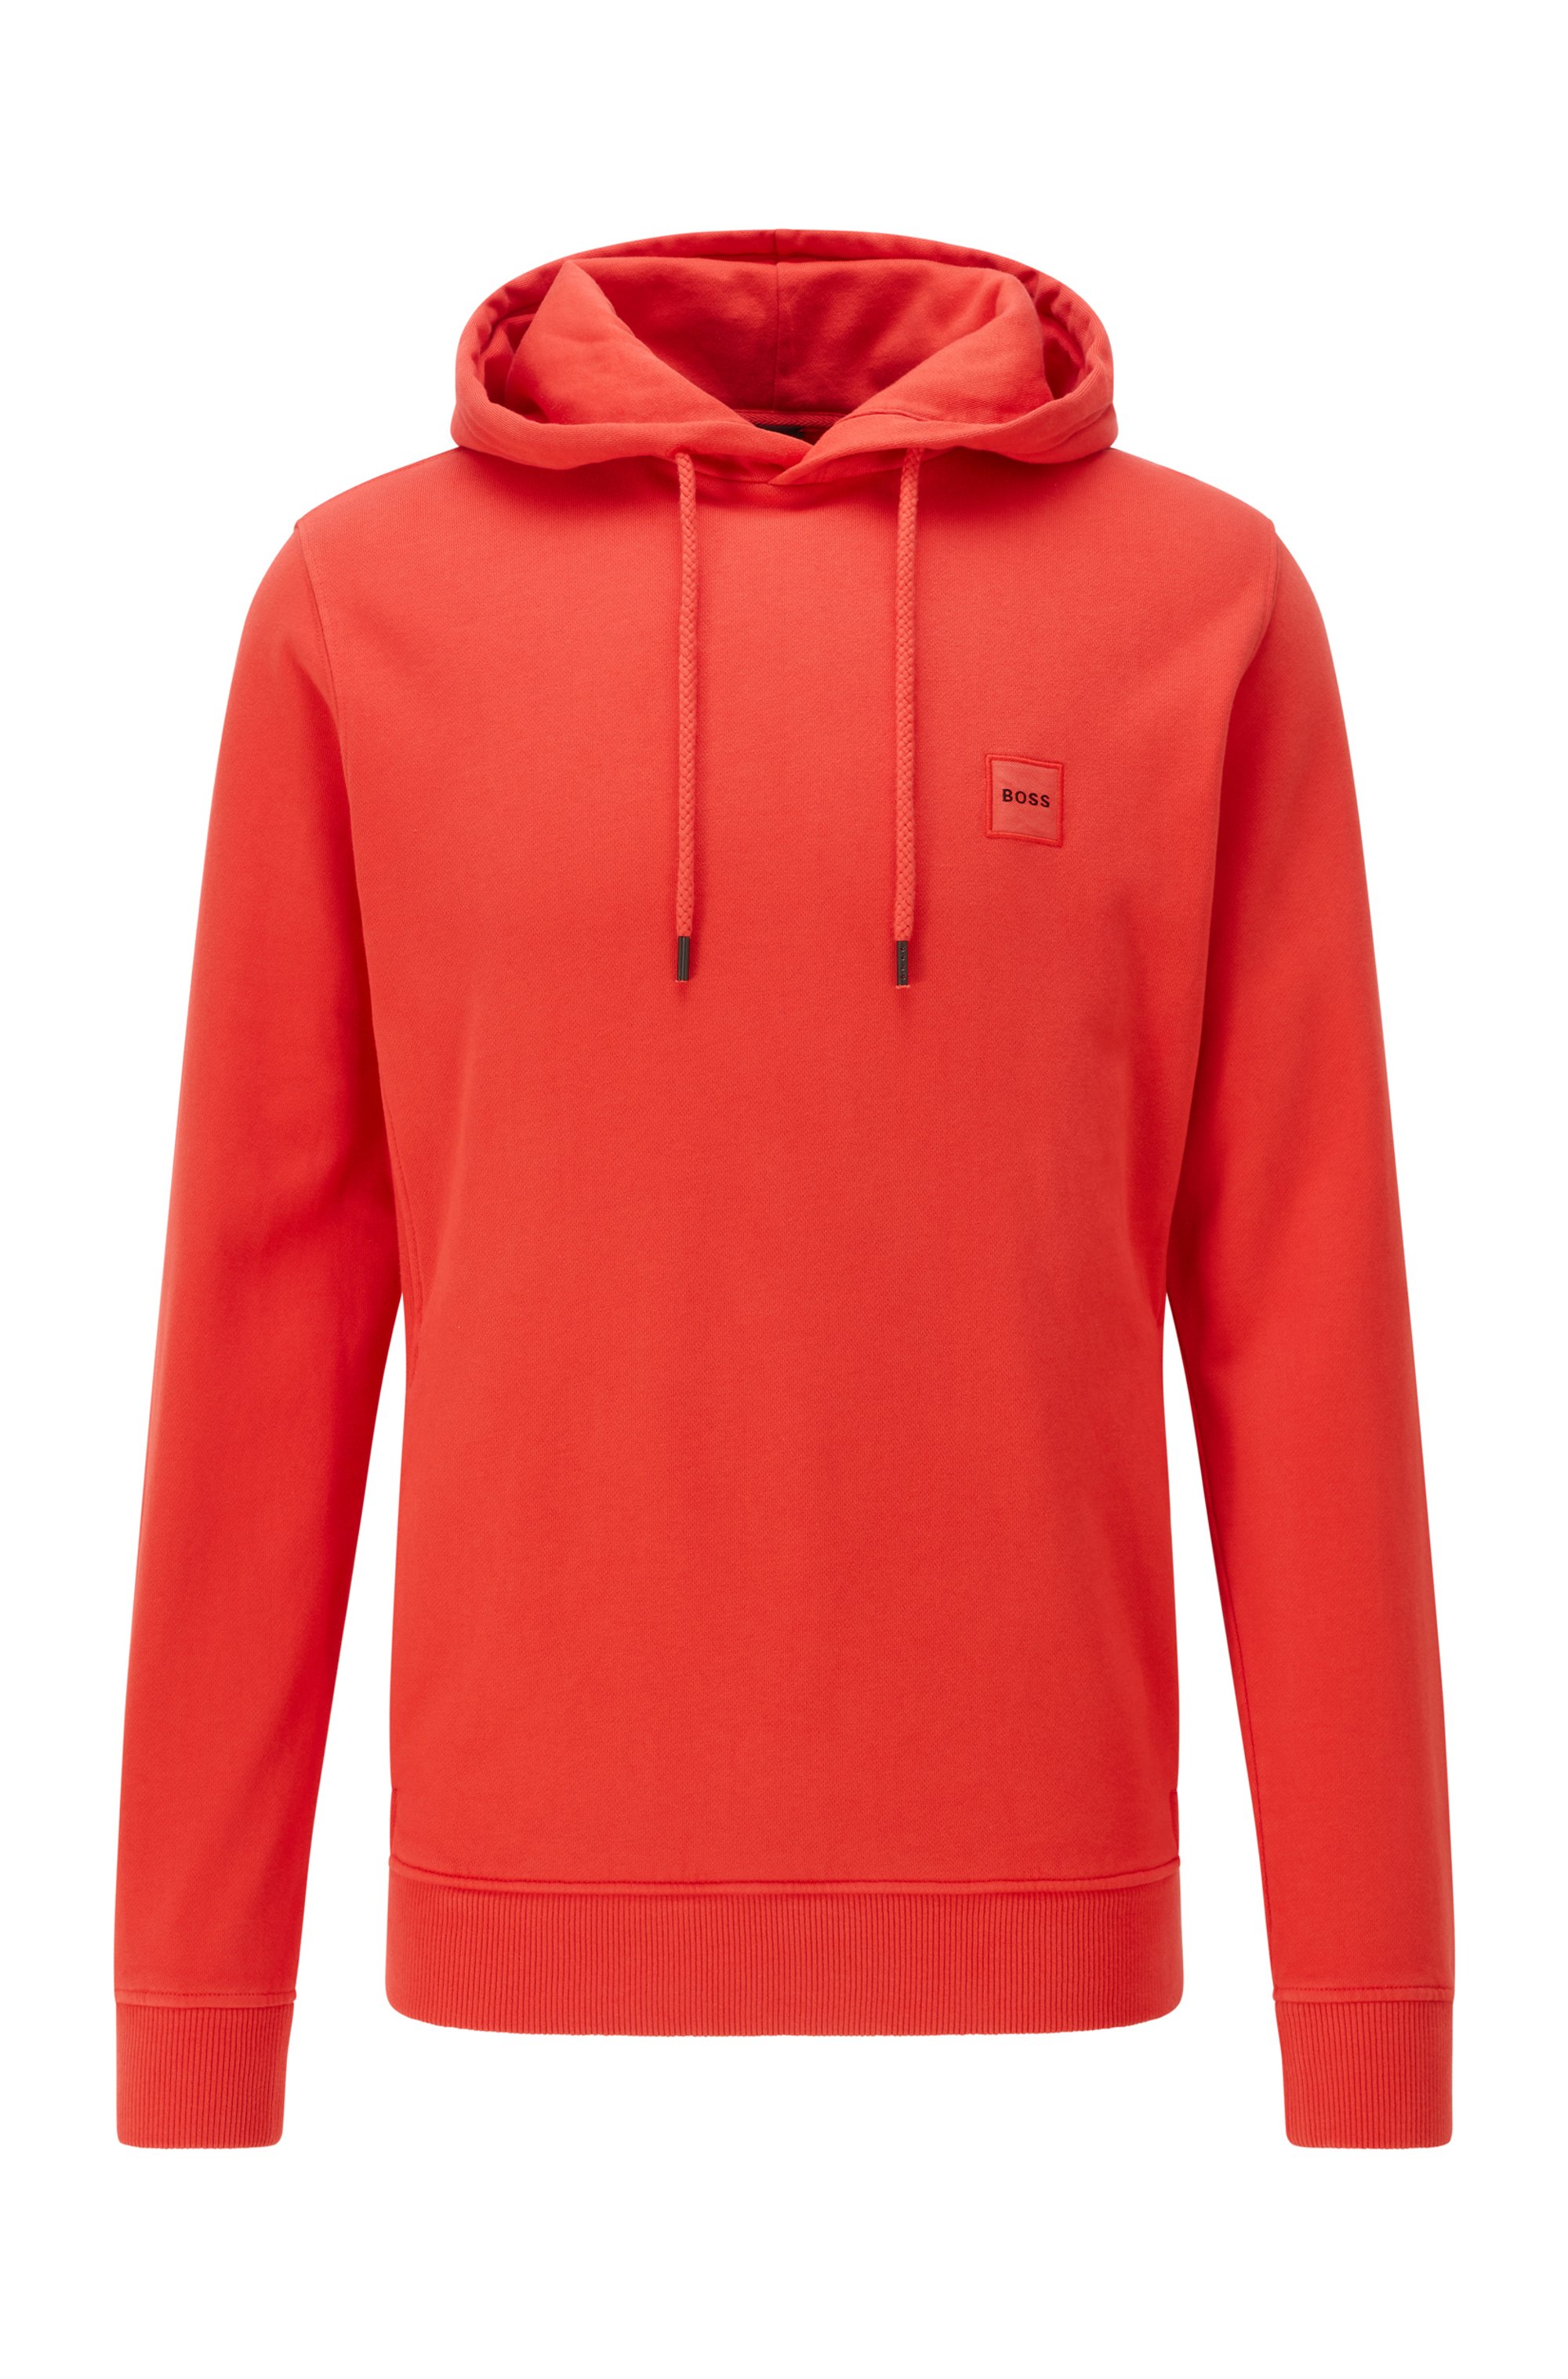 Relaxed-fit hooded sweatshirt in organic cotton, Orange